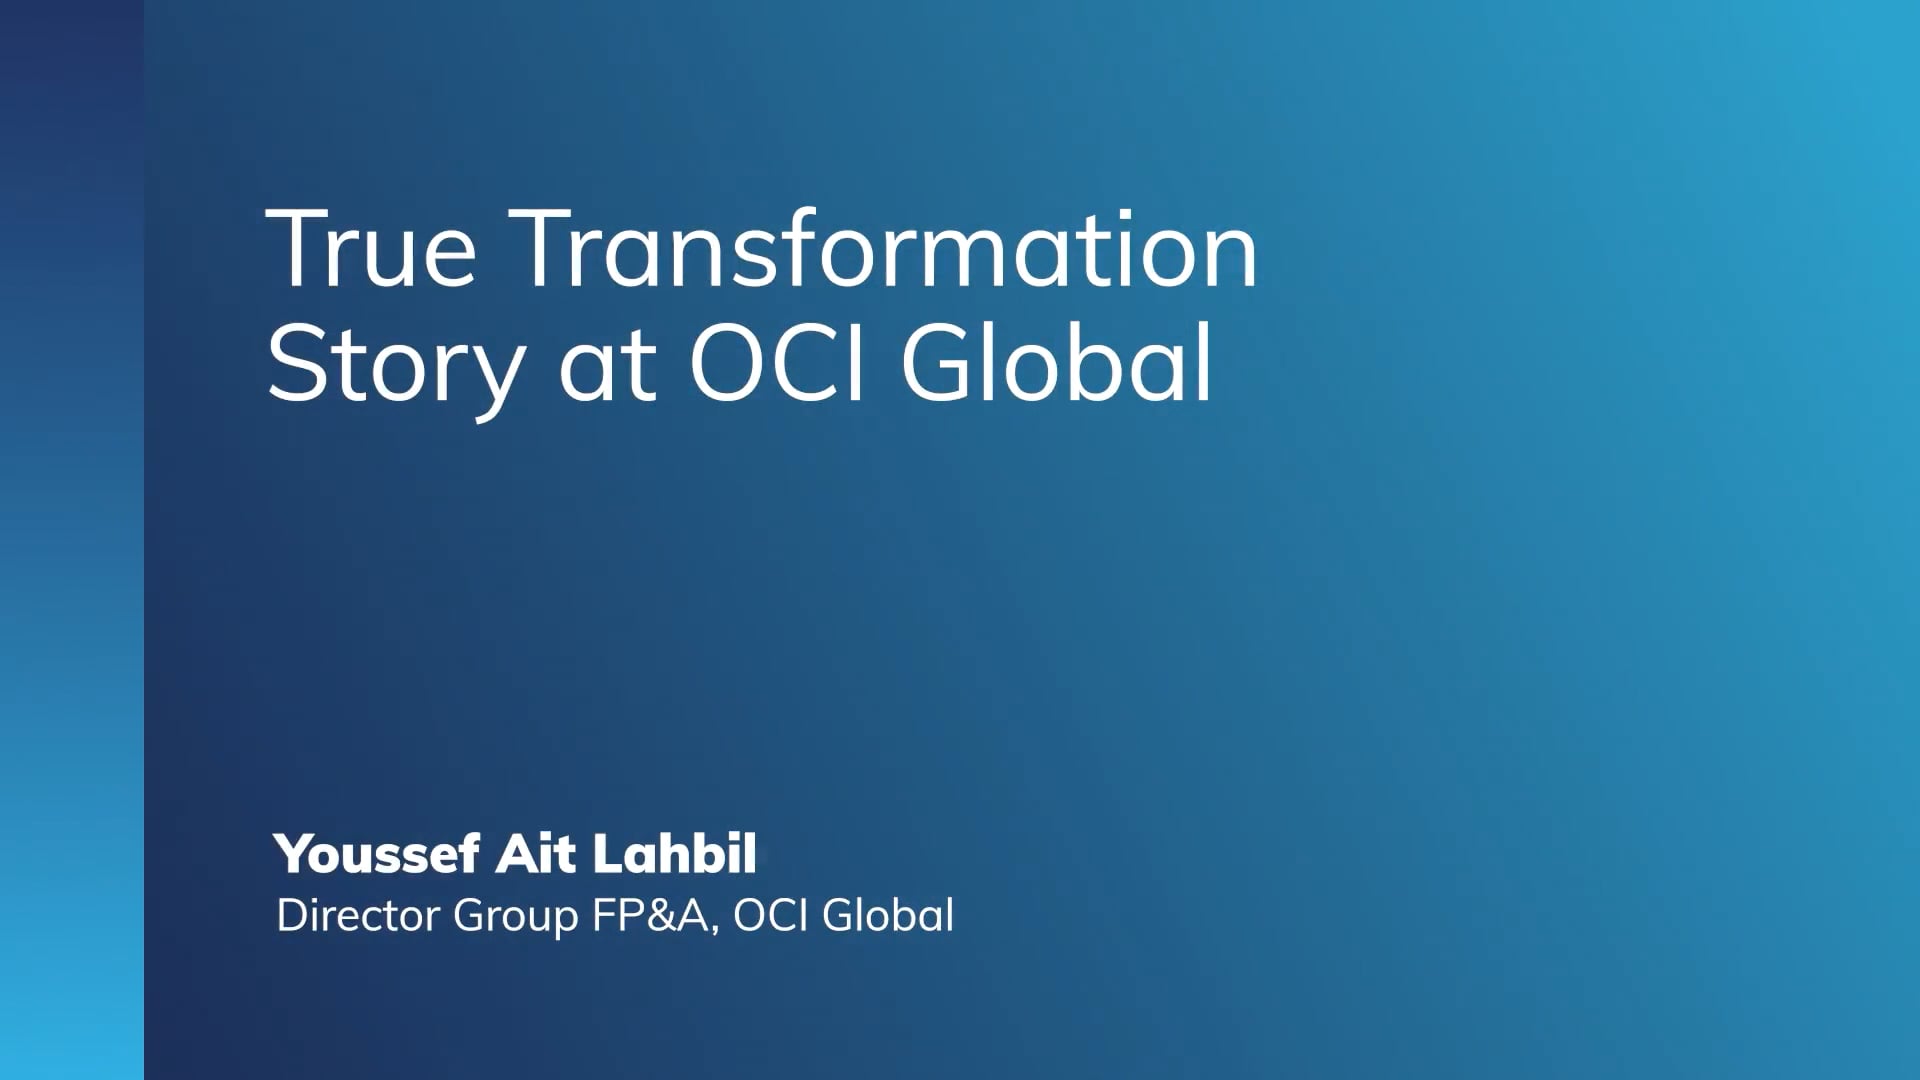 Real Case, True Transformation Story at OCI Global